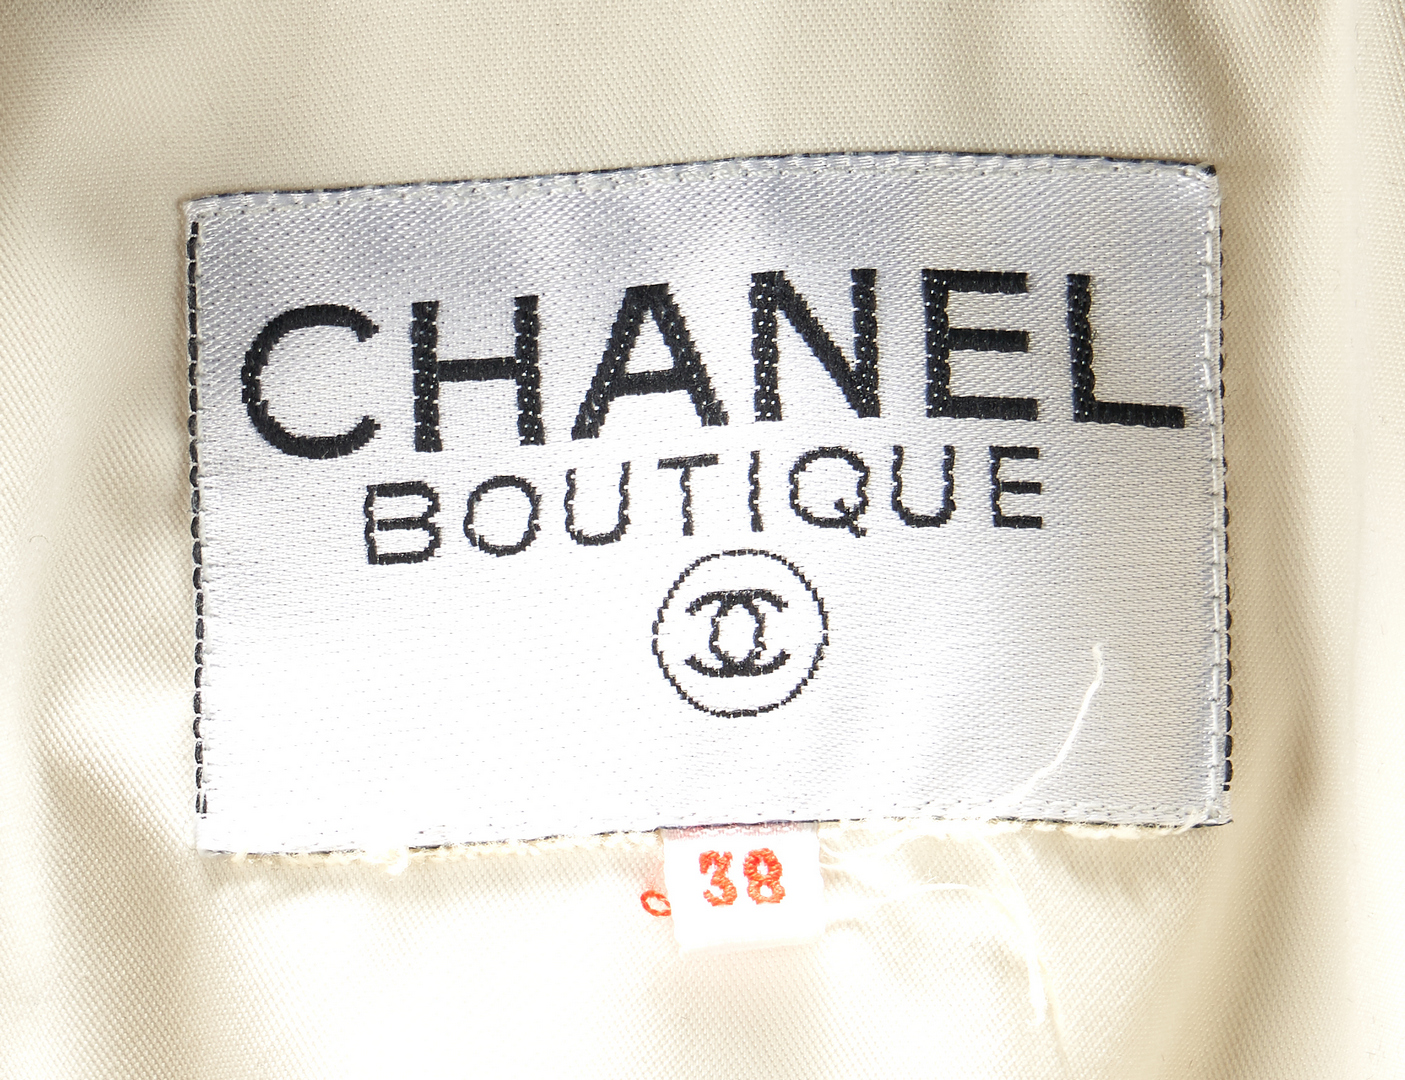 Lot 707: 5 Chanel Designer Items, incl. Leather Jacket